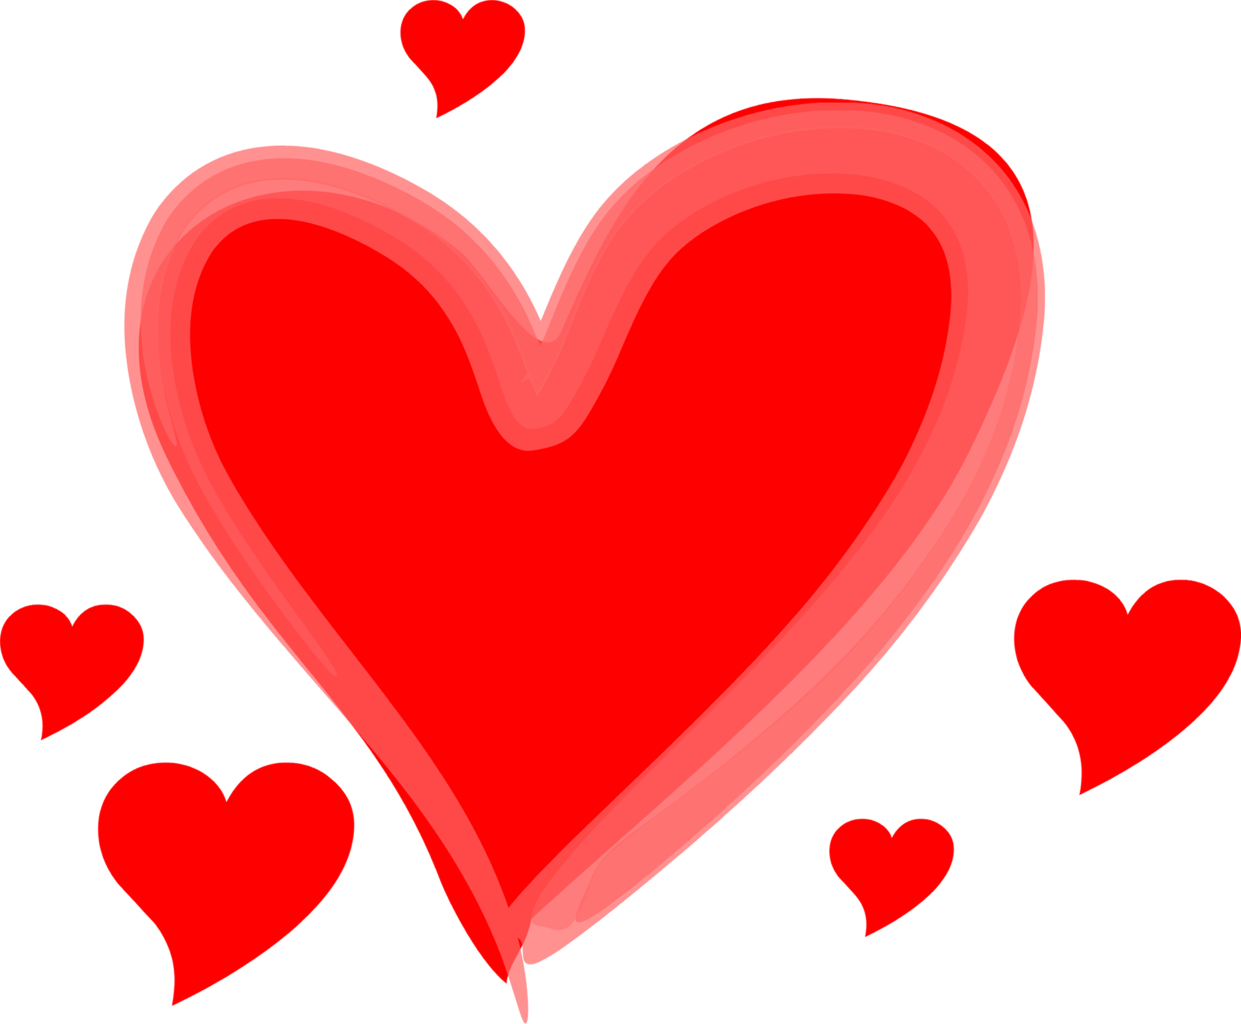 Heart PNG iamges Clipart free